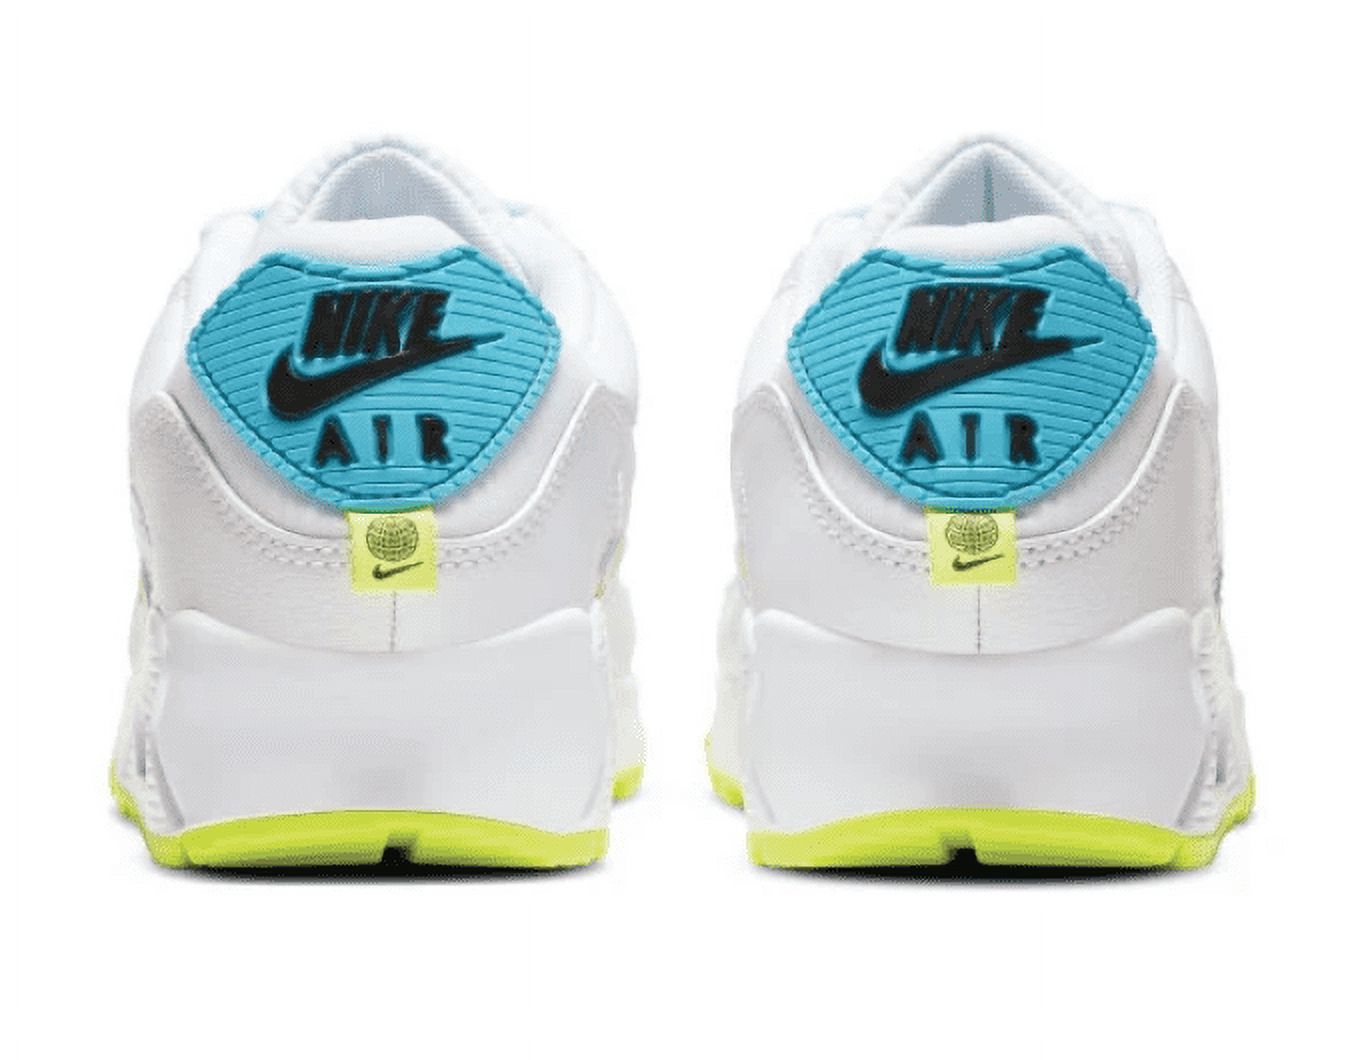 Nike Womens Air Max 90 Se "WorldWide" Running Shoes (7) - image 5 of 5